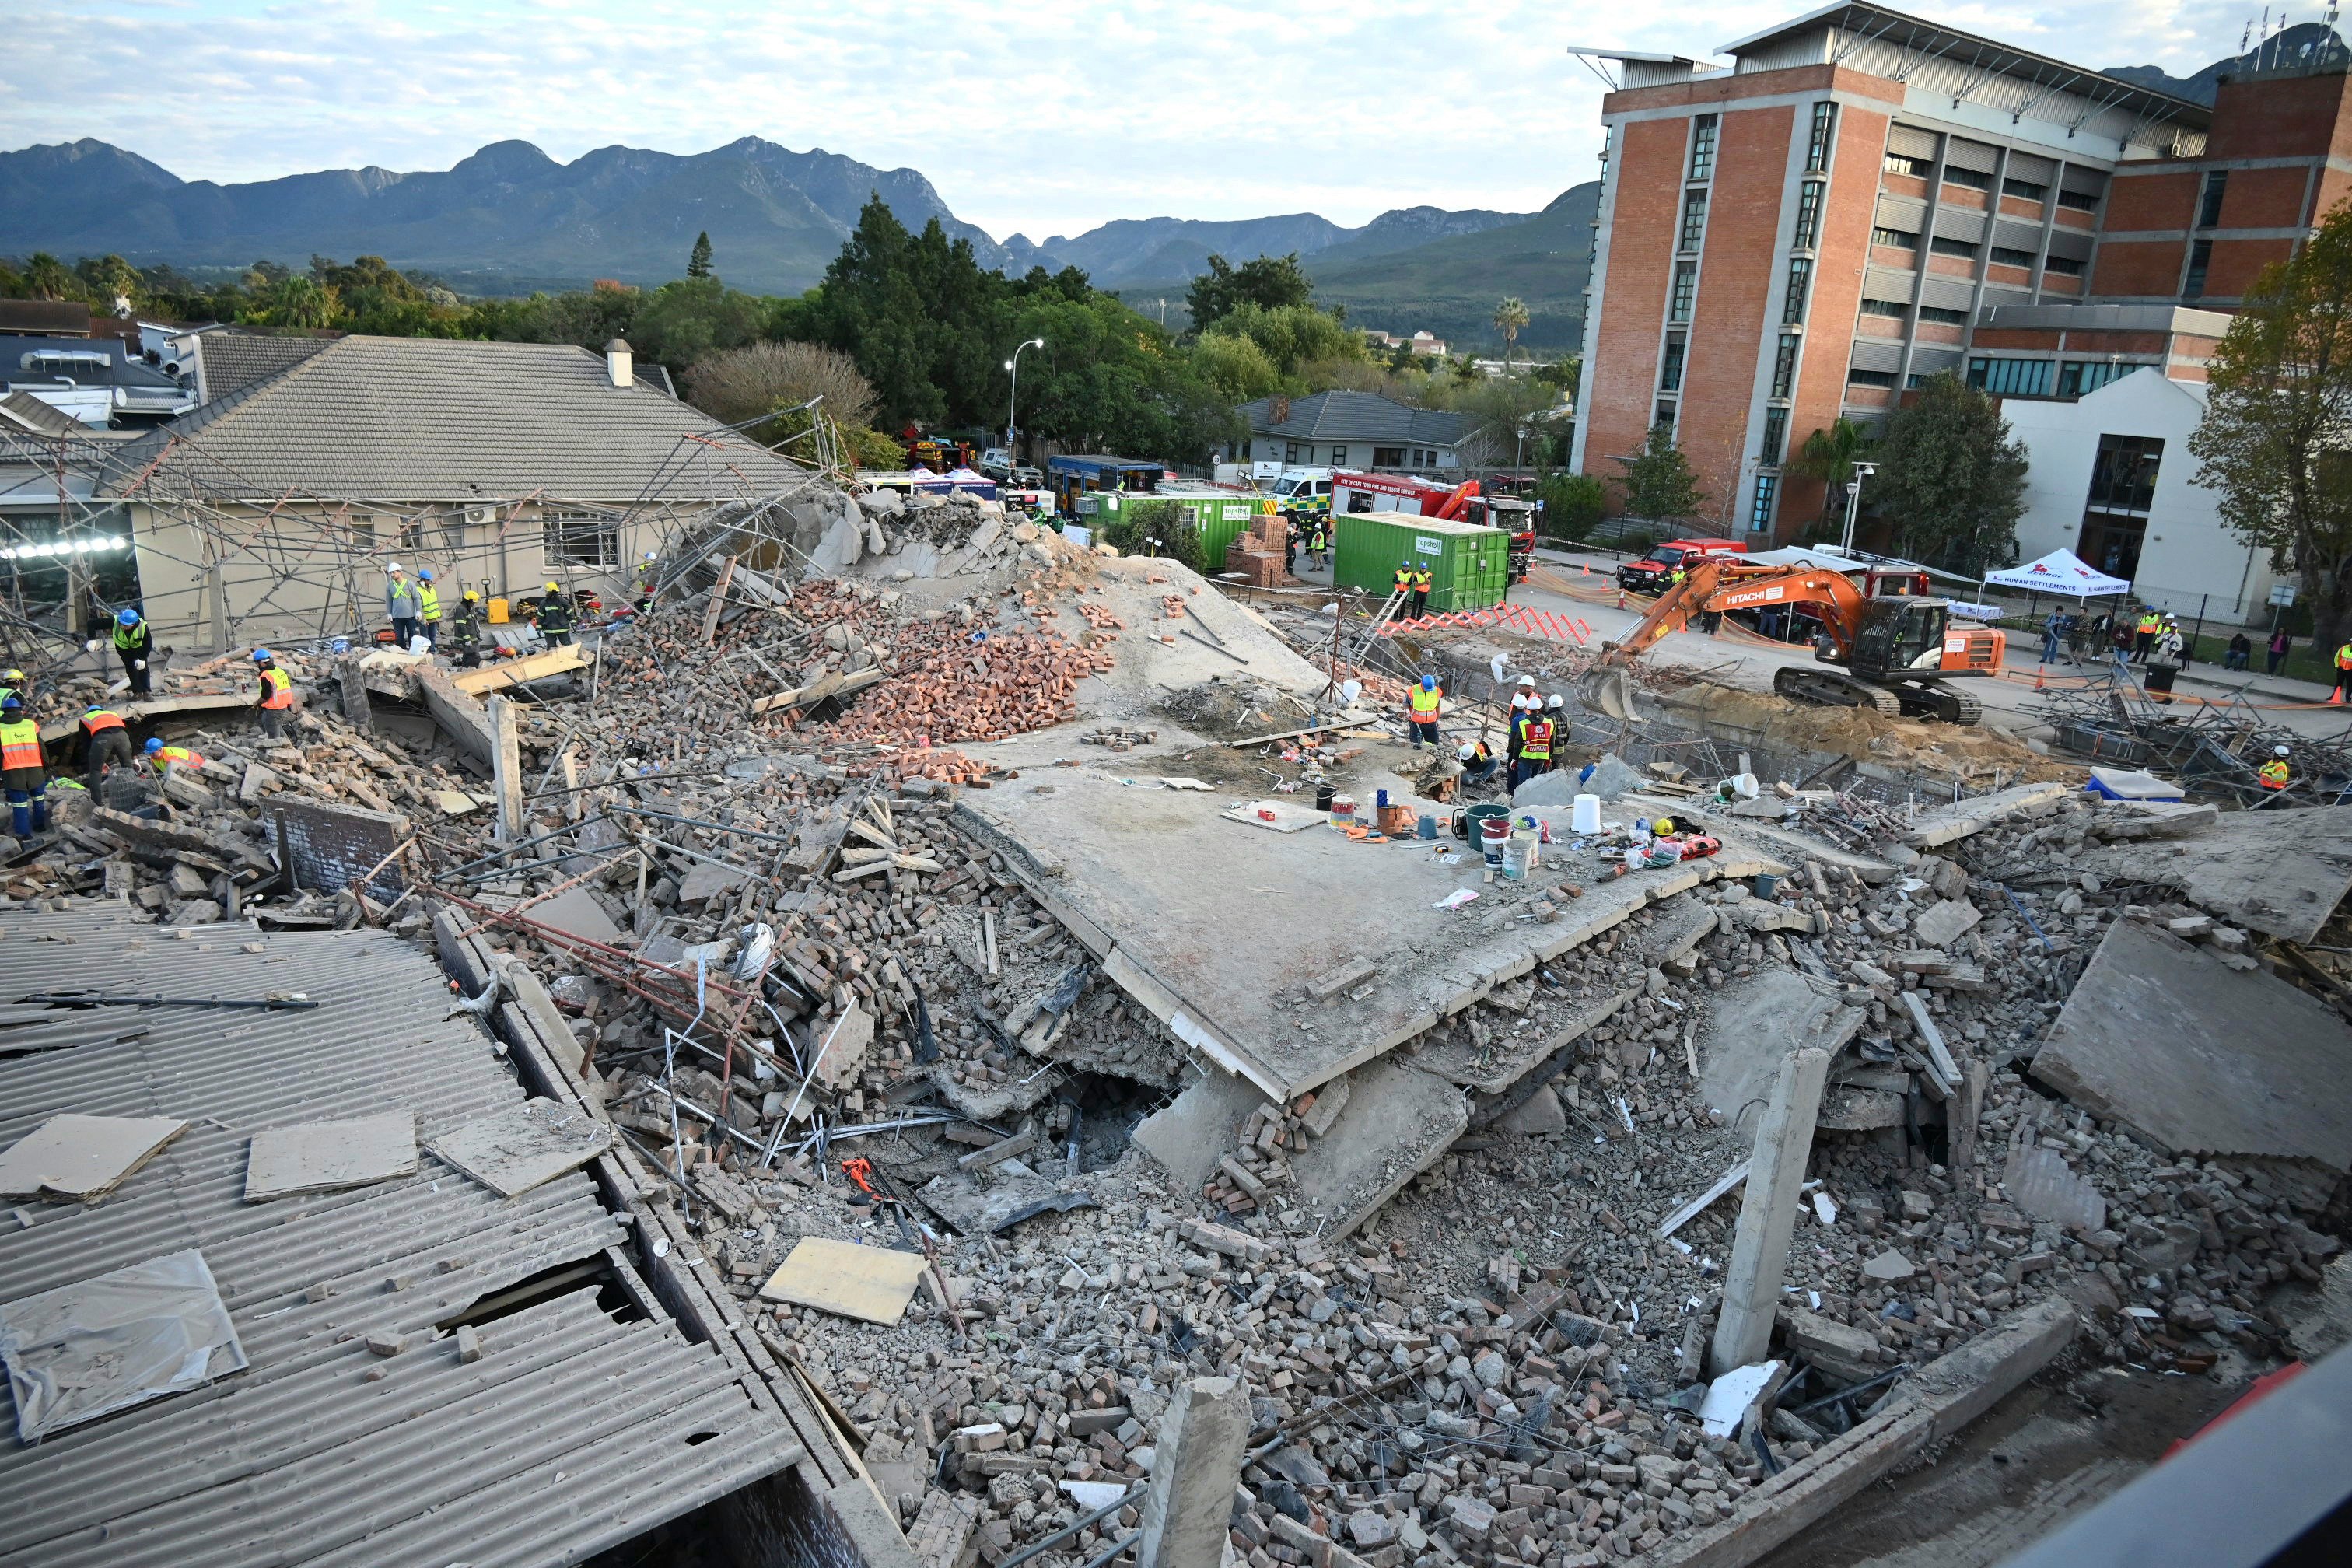 The scene of the collapsed building in George, South Africa. Photo: AP